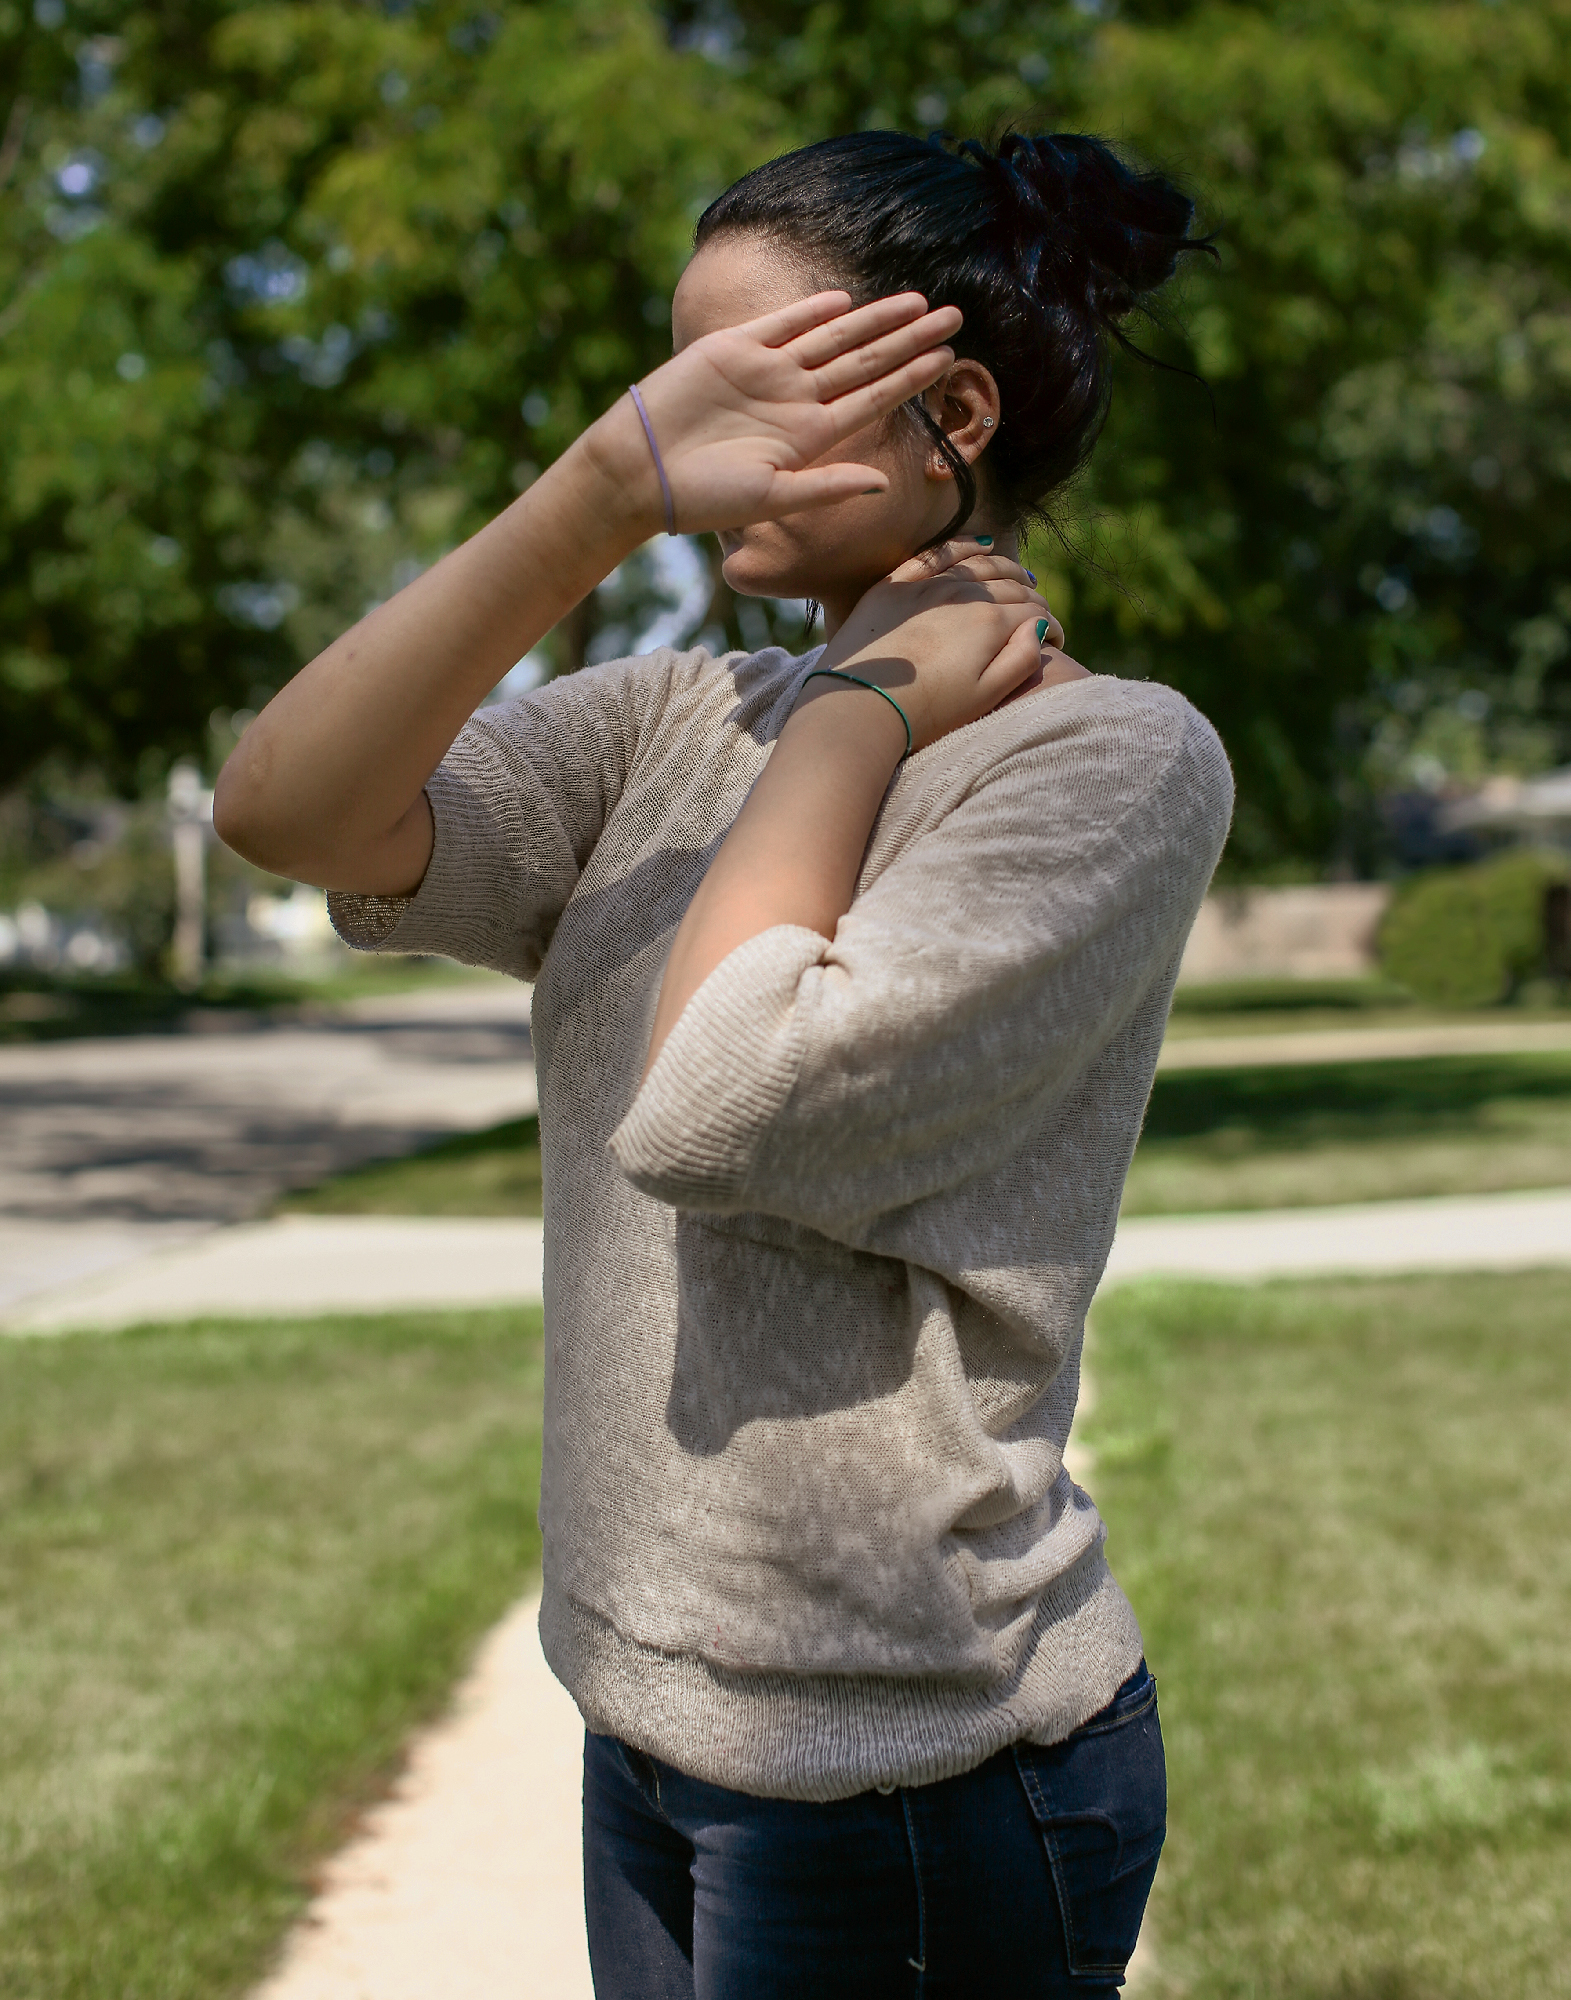 A black woman in a light brown sweater shields her face from the camera